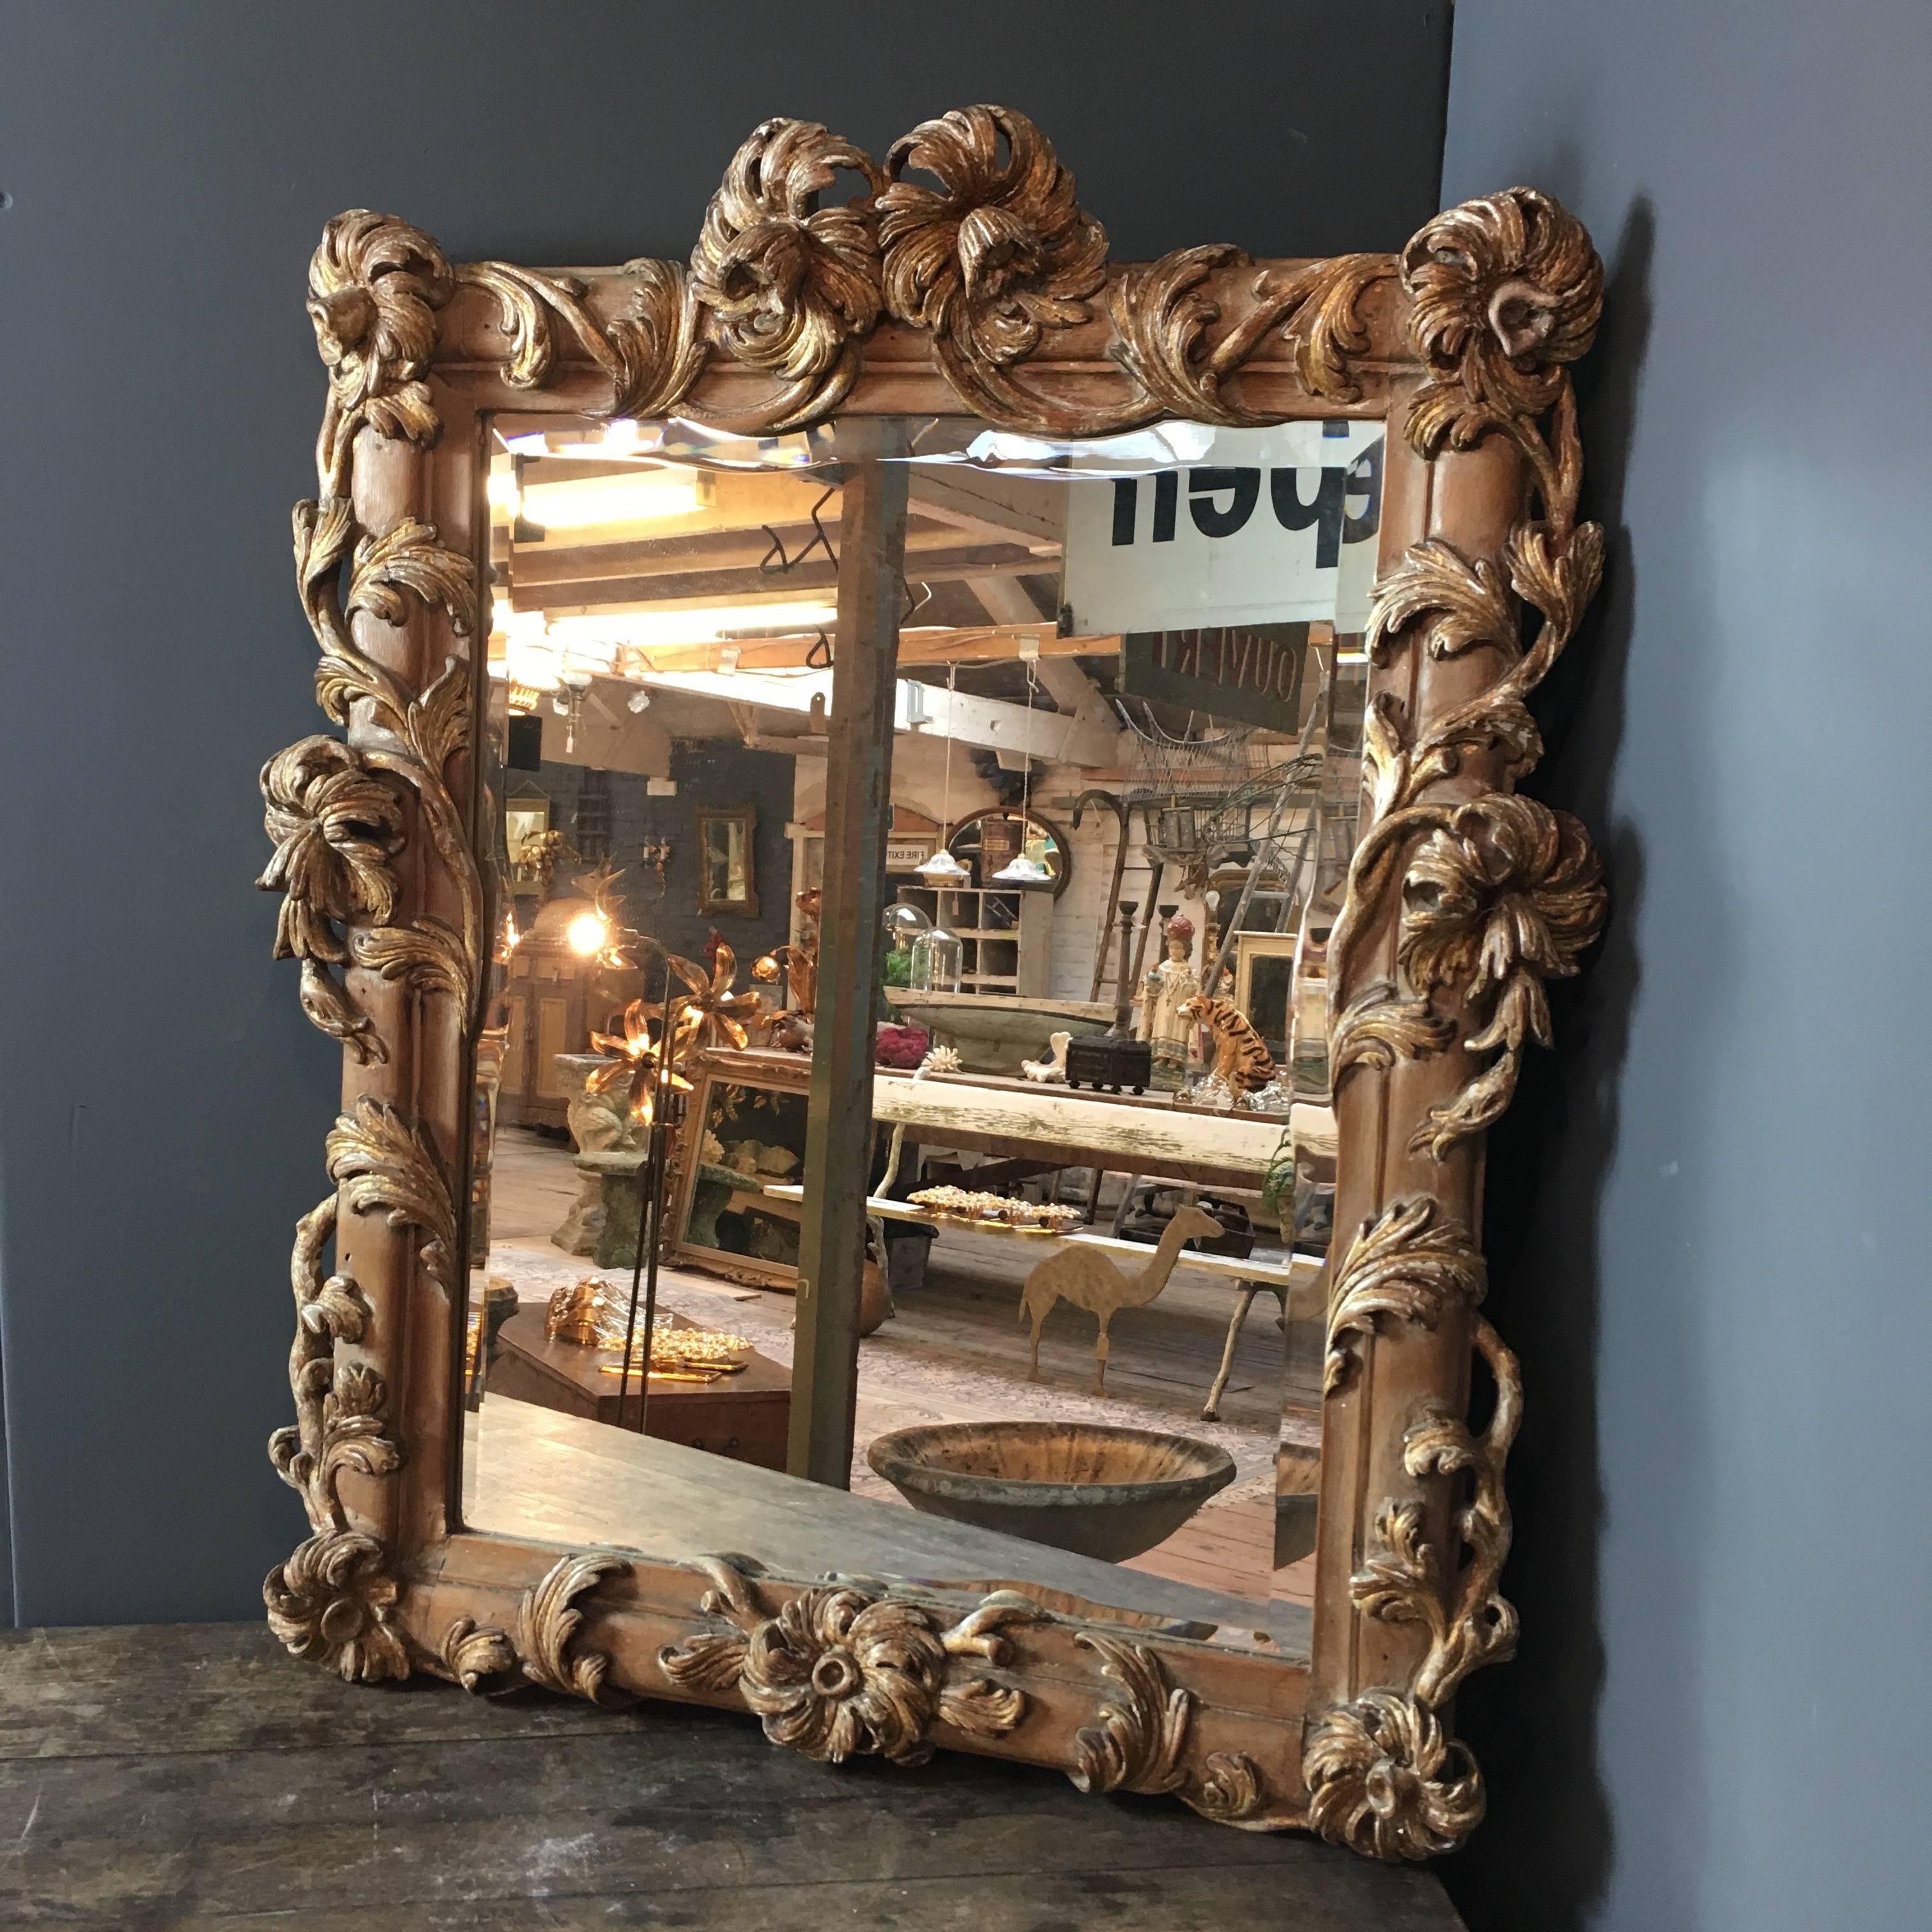 Antique wooden carved French mirror 
The mirror has its original glass which is hand bevelled 1 inch width, the bevel follows the lines of the carved frame
The wooden carvings of large flowers and leaves surround the frame, they have a beautiful